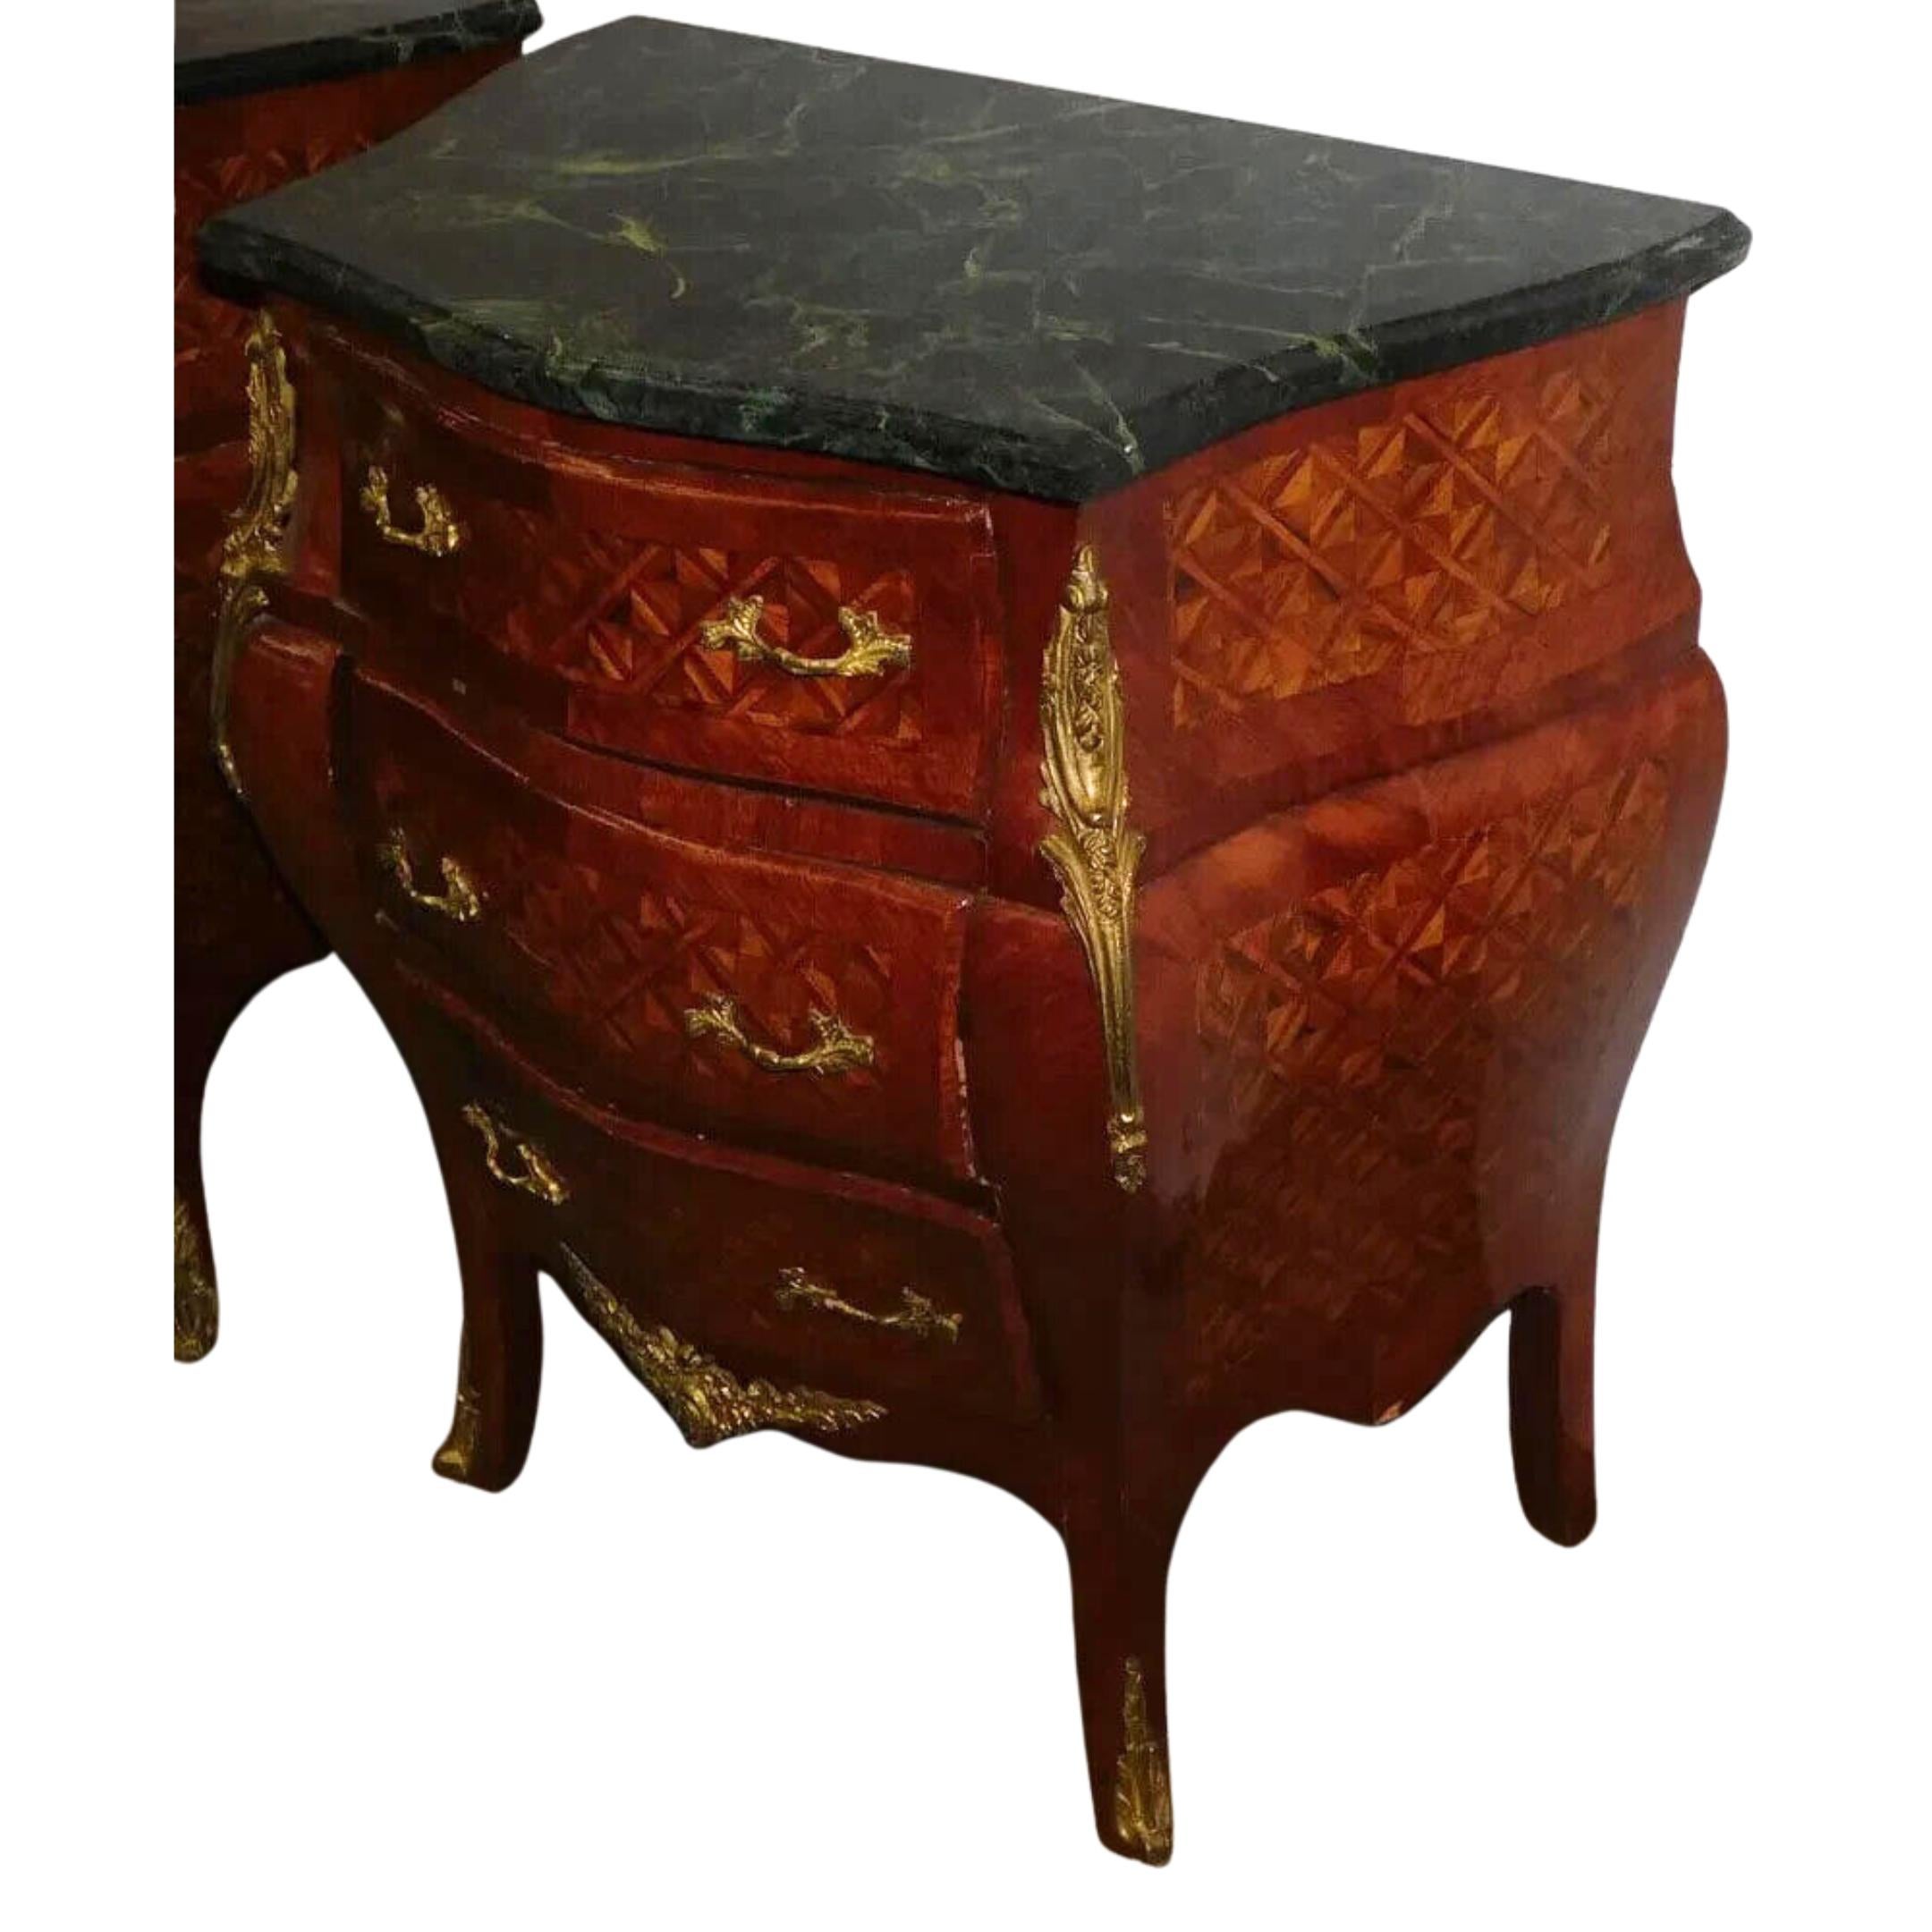 Other 20th C. Walnut Inlay, Marble Top, Diminutive, With Bronze Commodes, Set of Two!